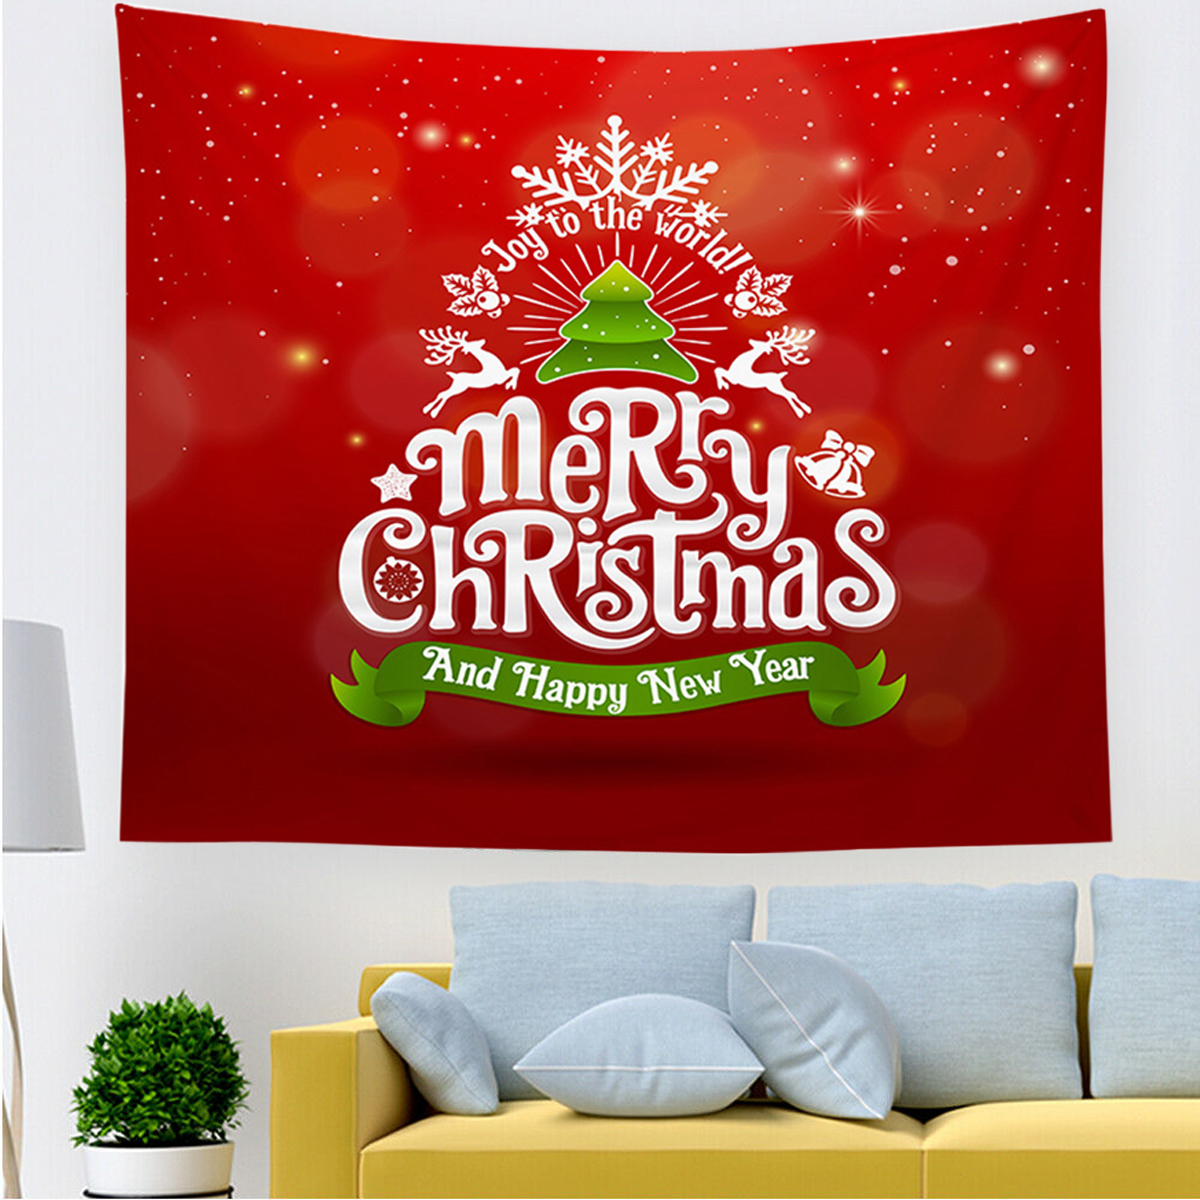 Christmas-Hanging-Cloth-Custom-Red-Santa-Claus-Bedside-Photography-Background-Cloth-Wall-Bedside-Dec-1749899-3